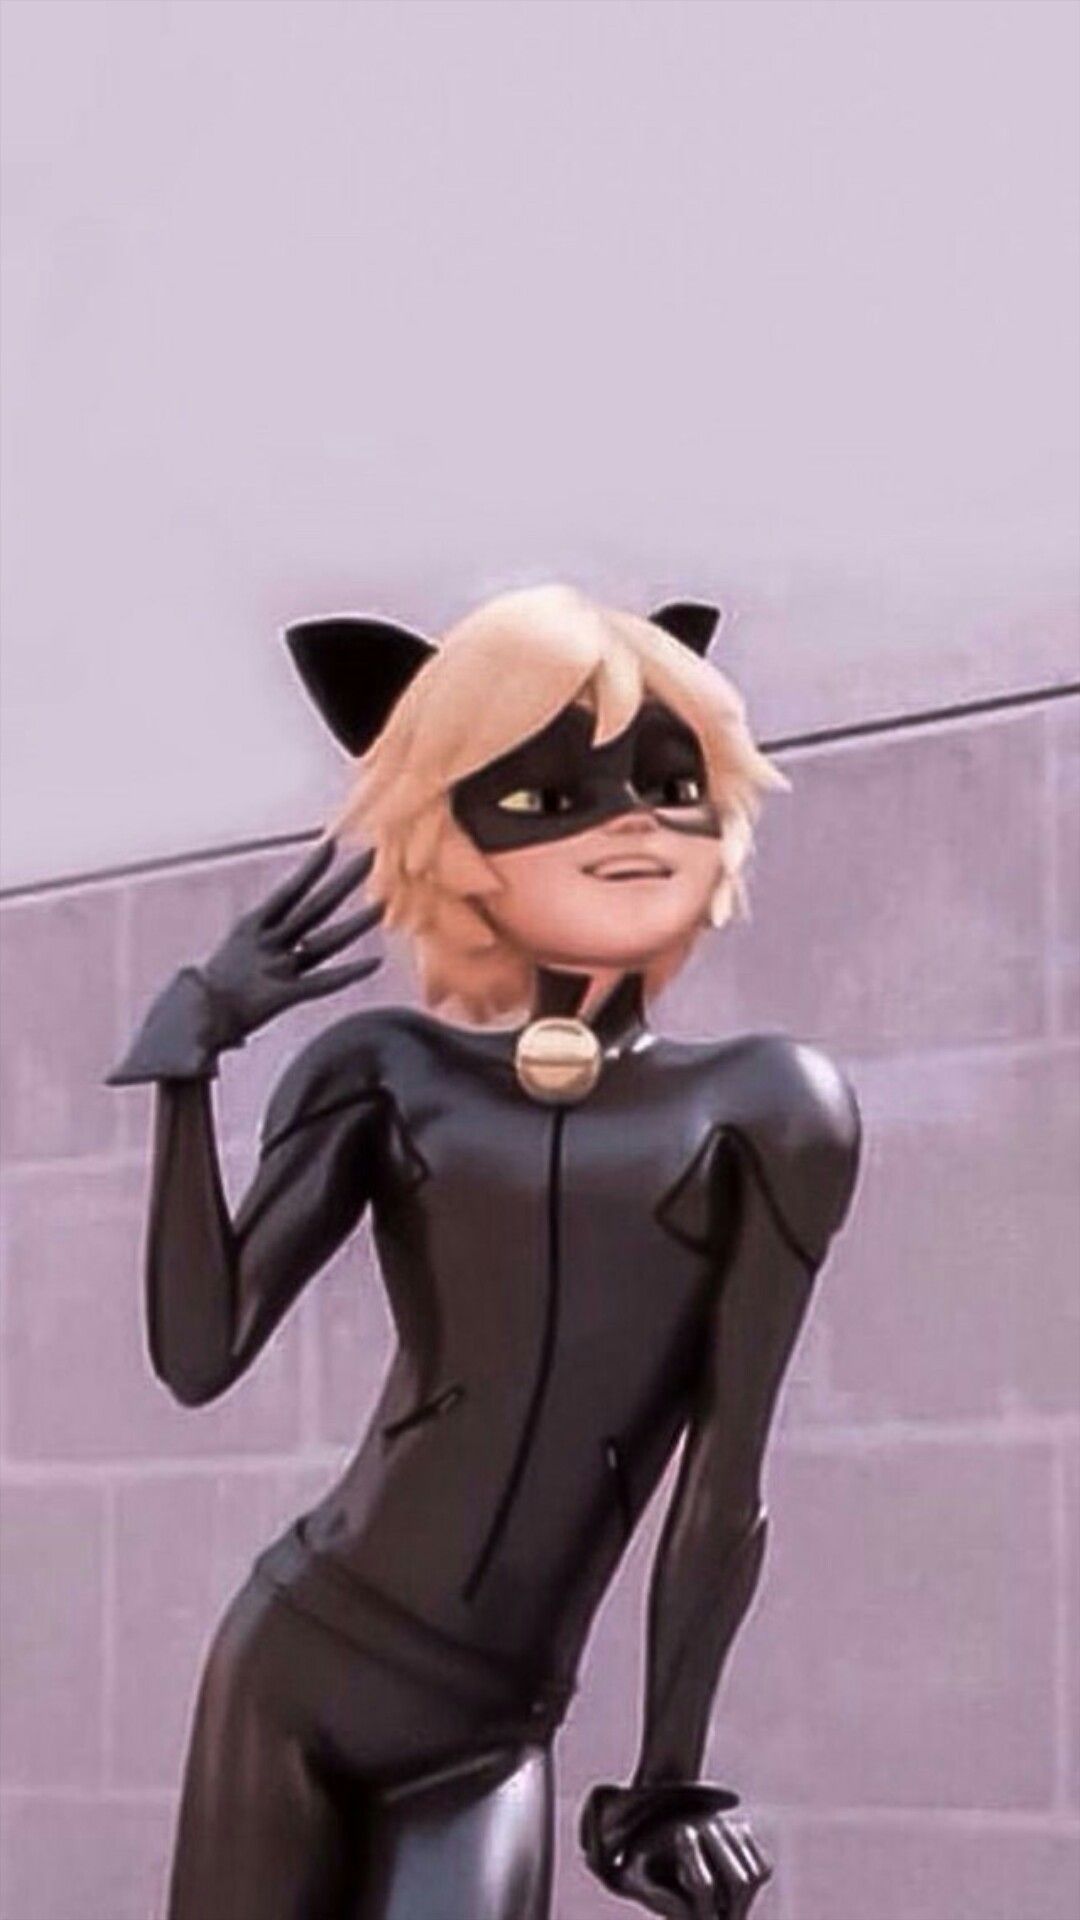 Aesthetic Chat Noir Wallpapers Wallpaper Cave 155 best miraculous ladybug iphone wallpapers images in 2019. aesthetic chat noir wallpapers